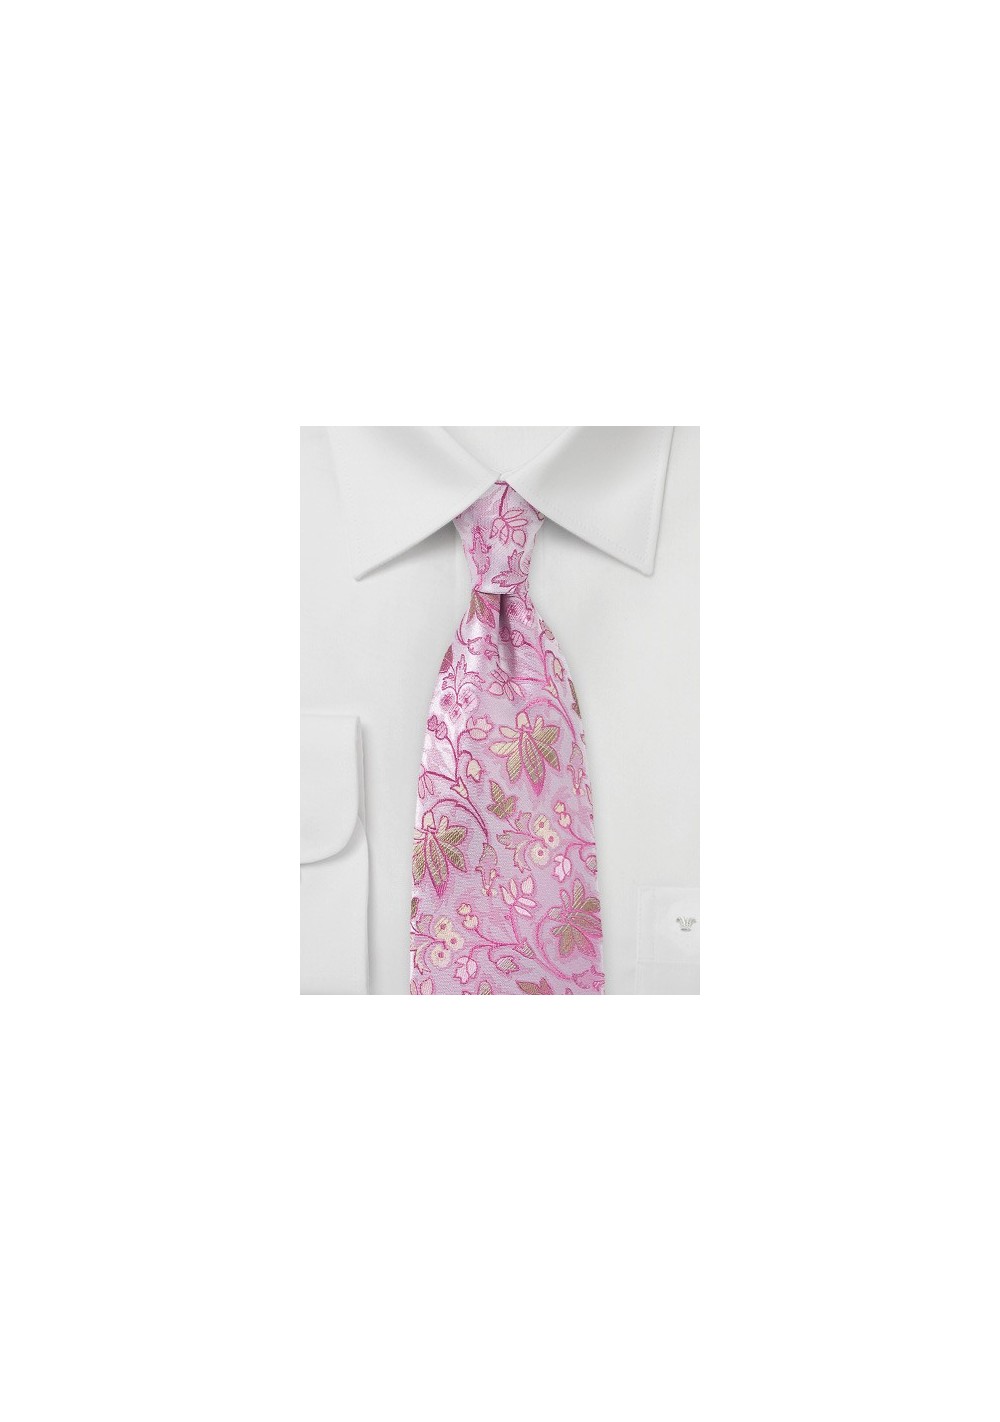 Festive Print Tie in an Array of Pink Tones